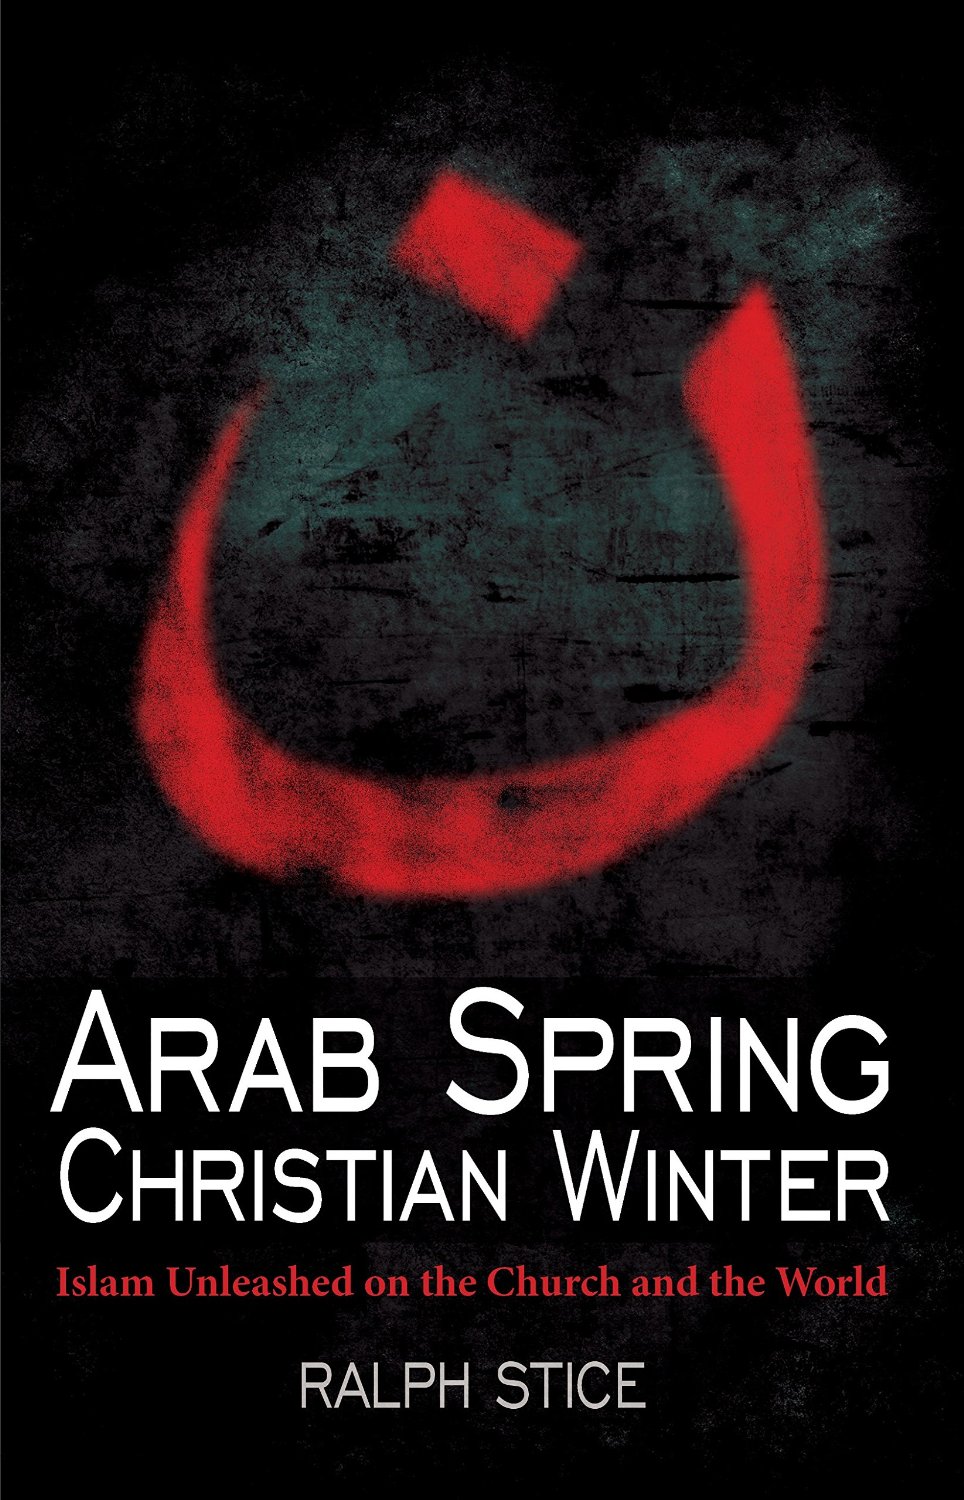 Book Review: Arab Spring, Christian Winter by Ralph Stice